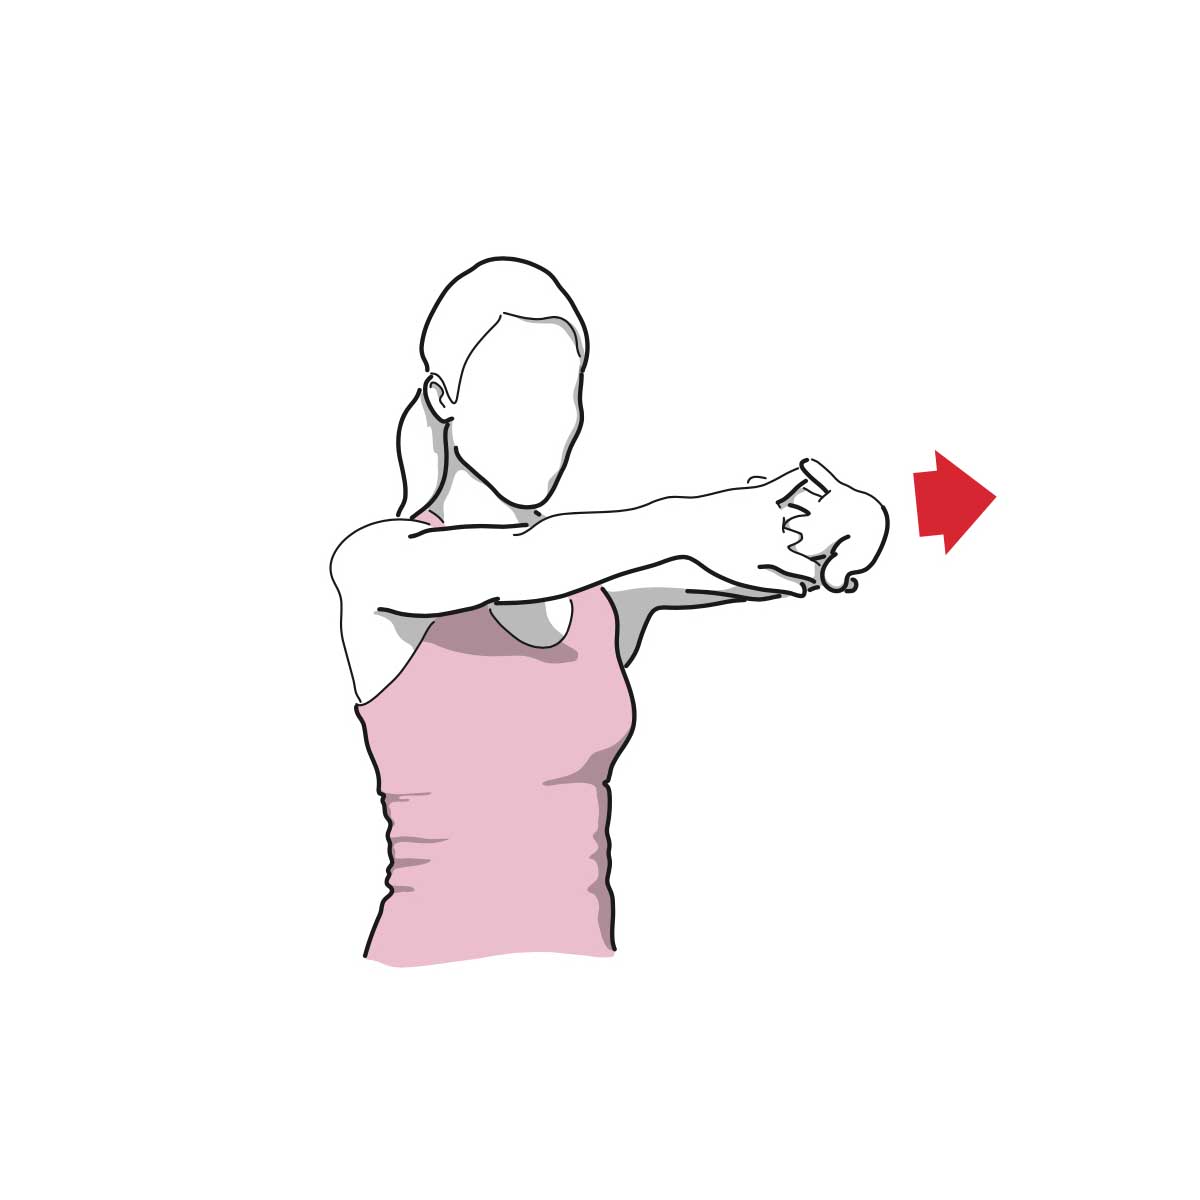 Stretch exercise illustration of a woman stretching her arms